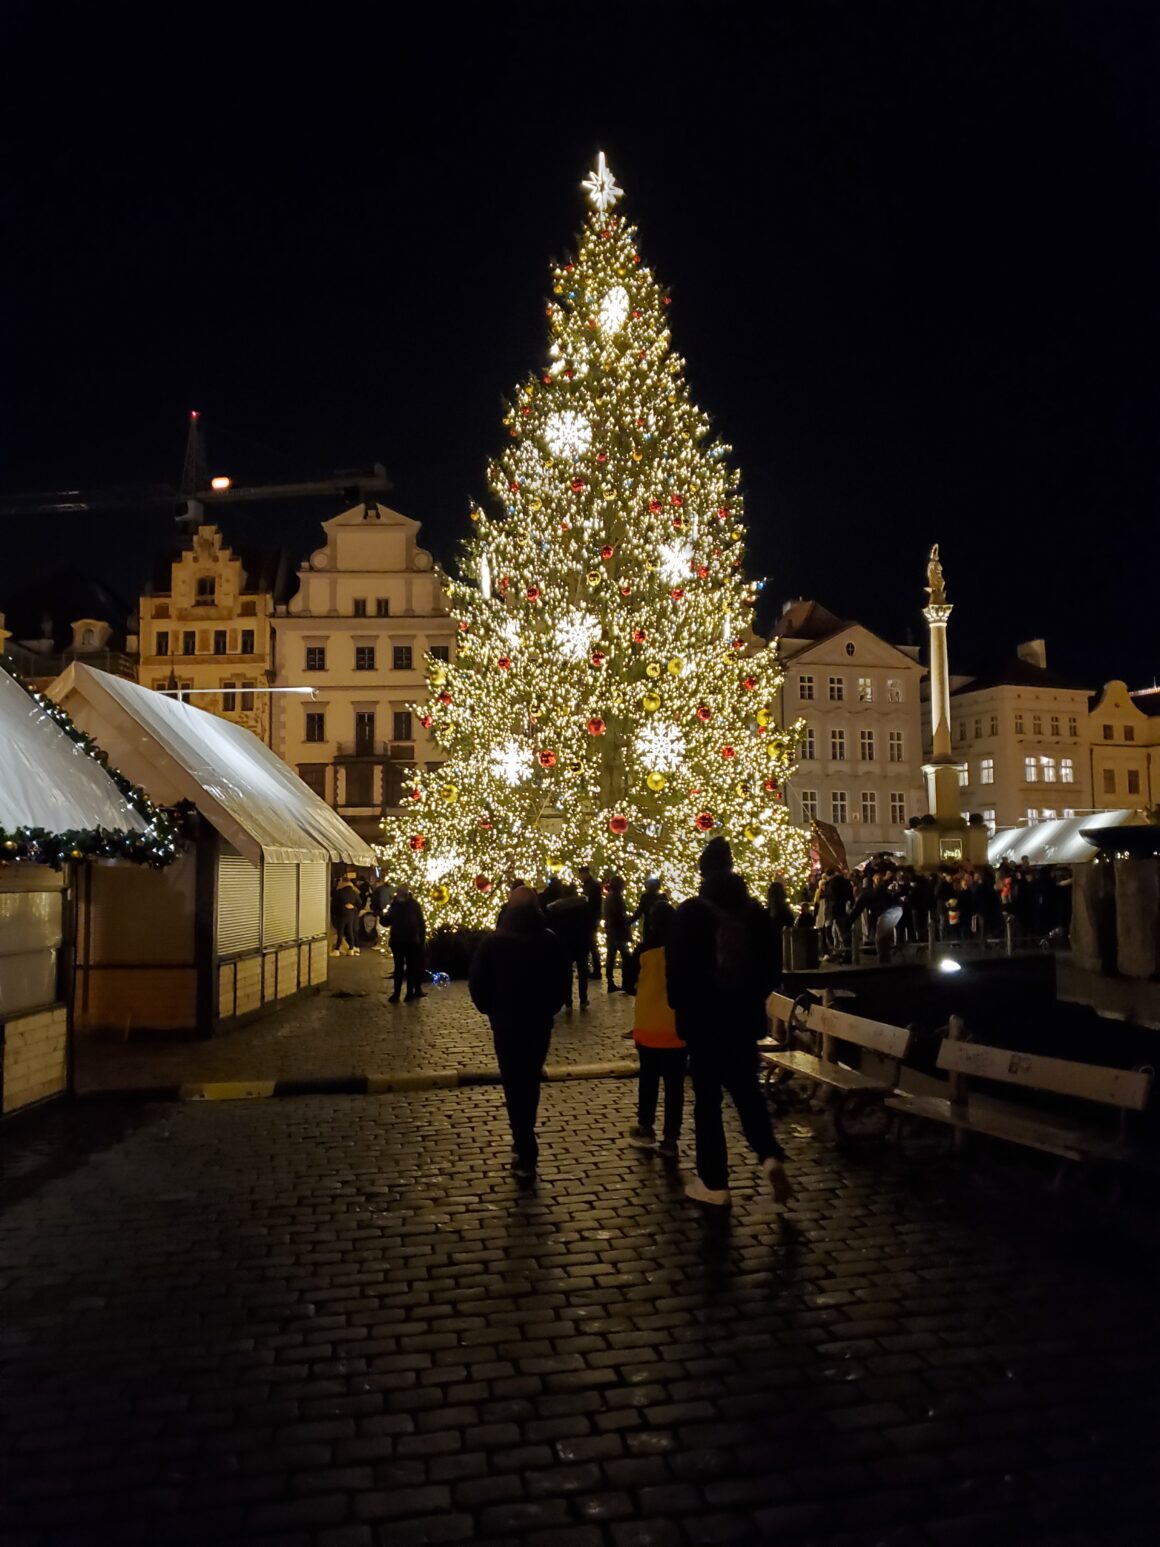 A Christmas tree surrounded by wooden stalls in Prague's old town square, one of the many Czech Christmas markets